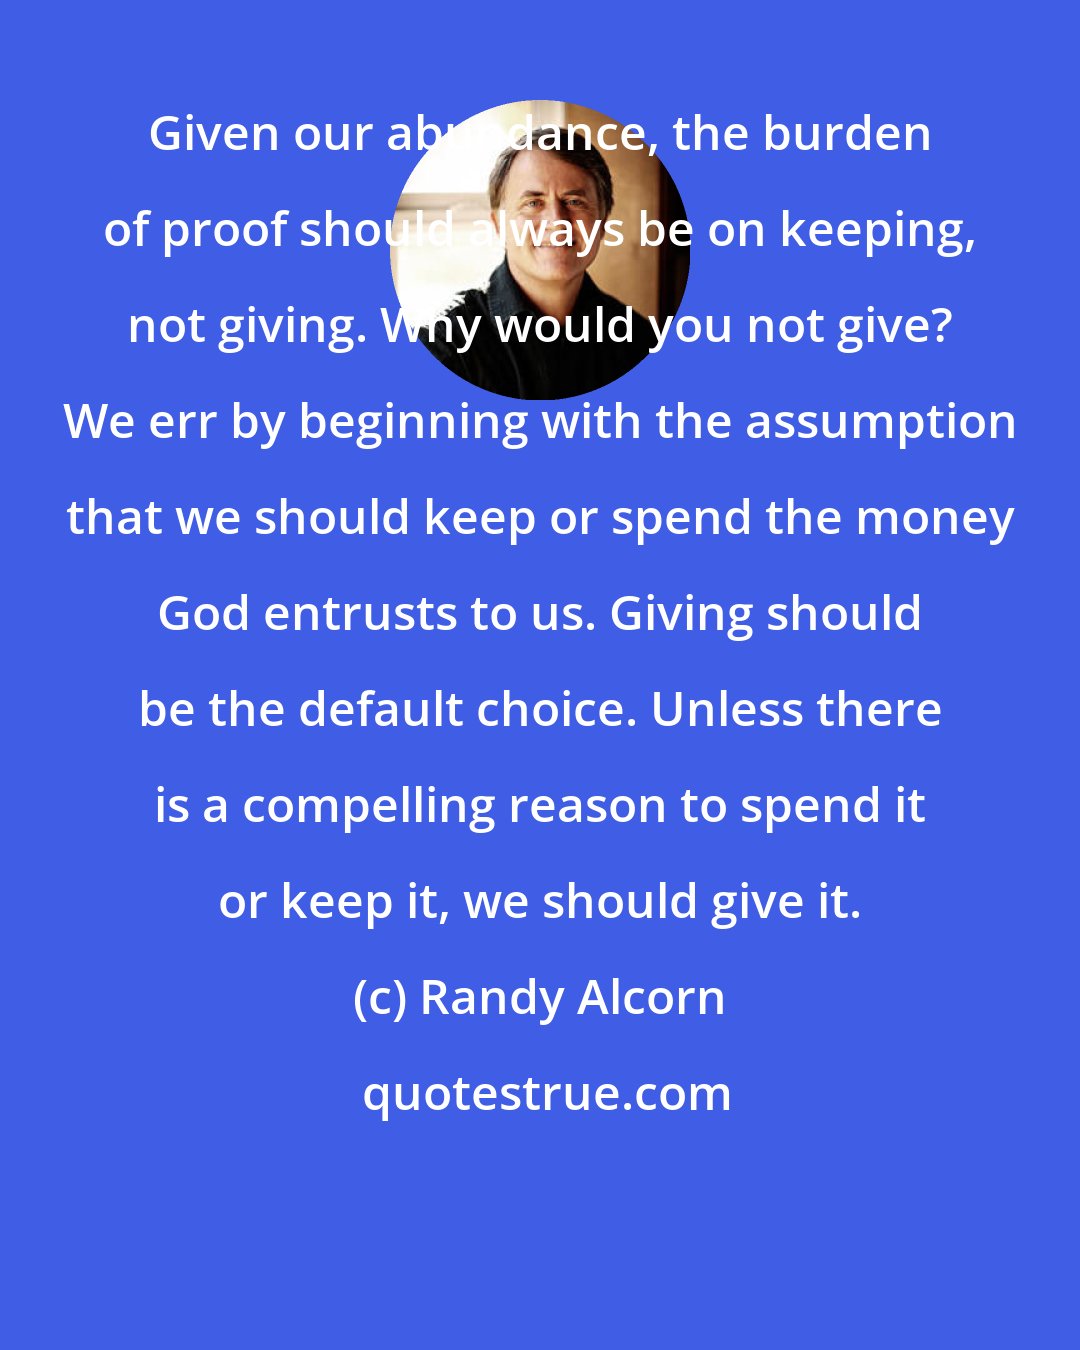 Randy Alcorn: Given our abundance, the burden of proof should always be on keeping, not giving. Why would you not give? We err by beginning with the assumption that we should keep or spend the money God entrusts to us. Giving should be the default choice. Unless there is a compelling reason to spend it or keep it, we should give it.